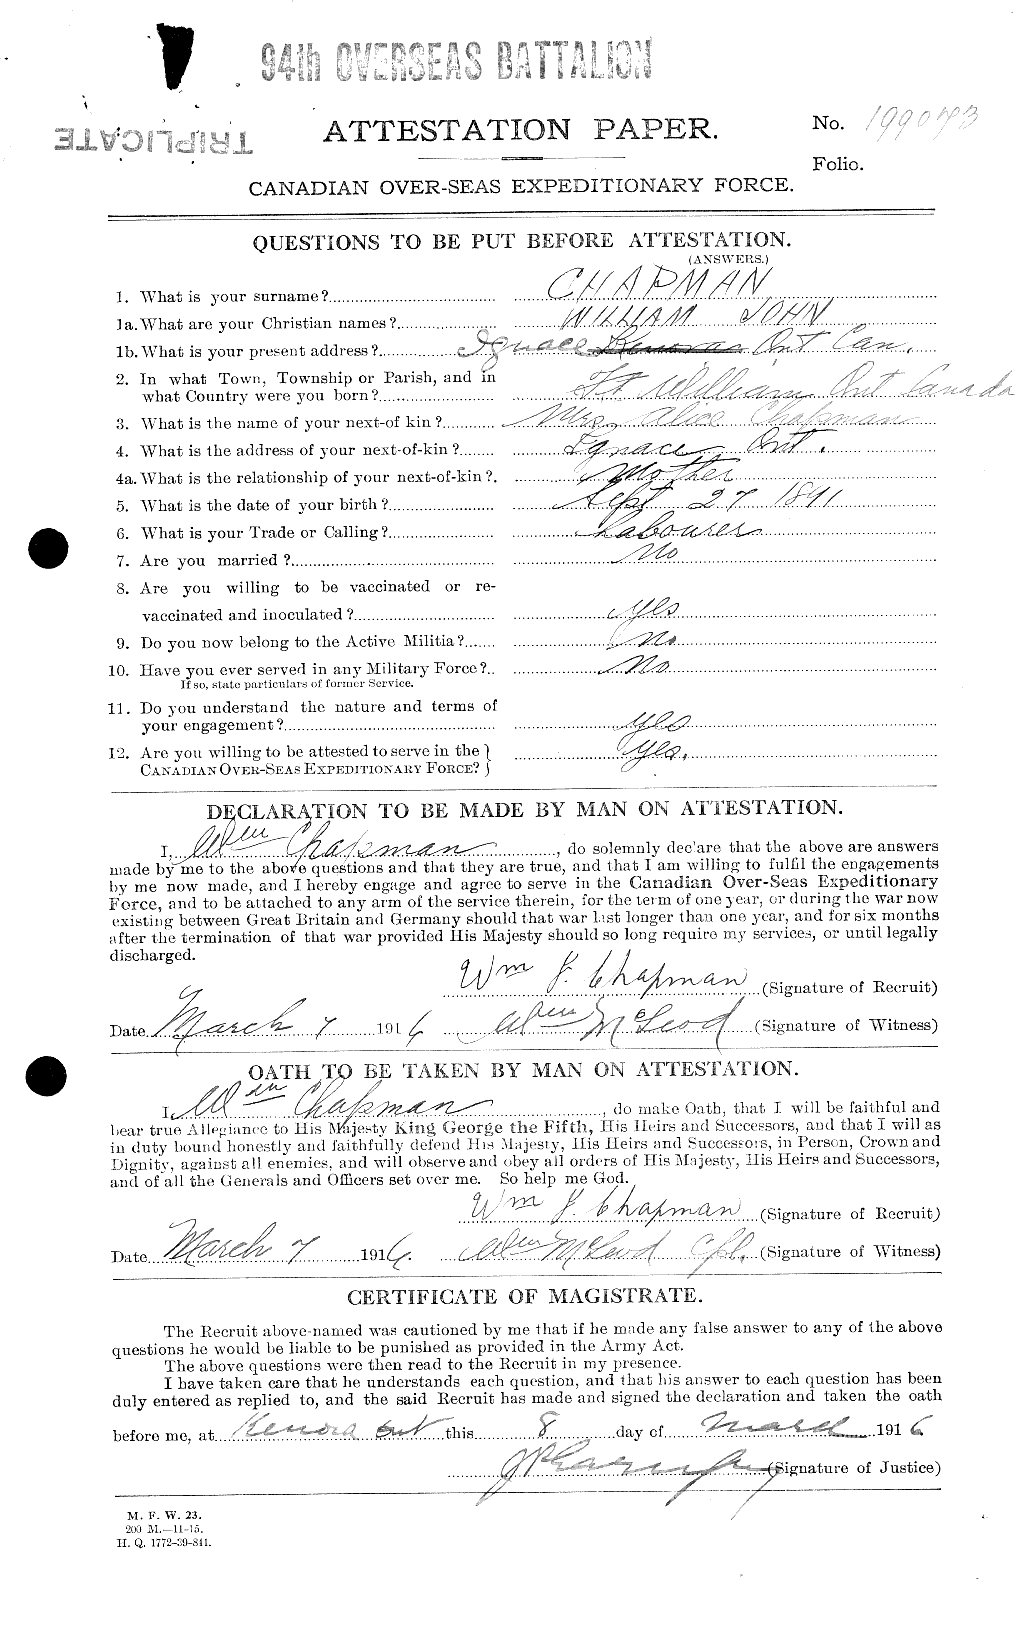 Personnel Records of the First World War - CEF 014870a